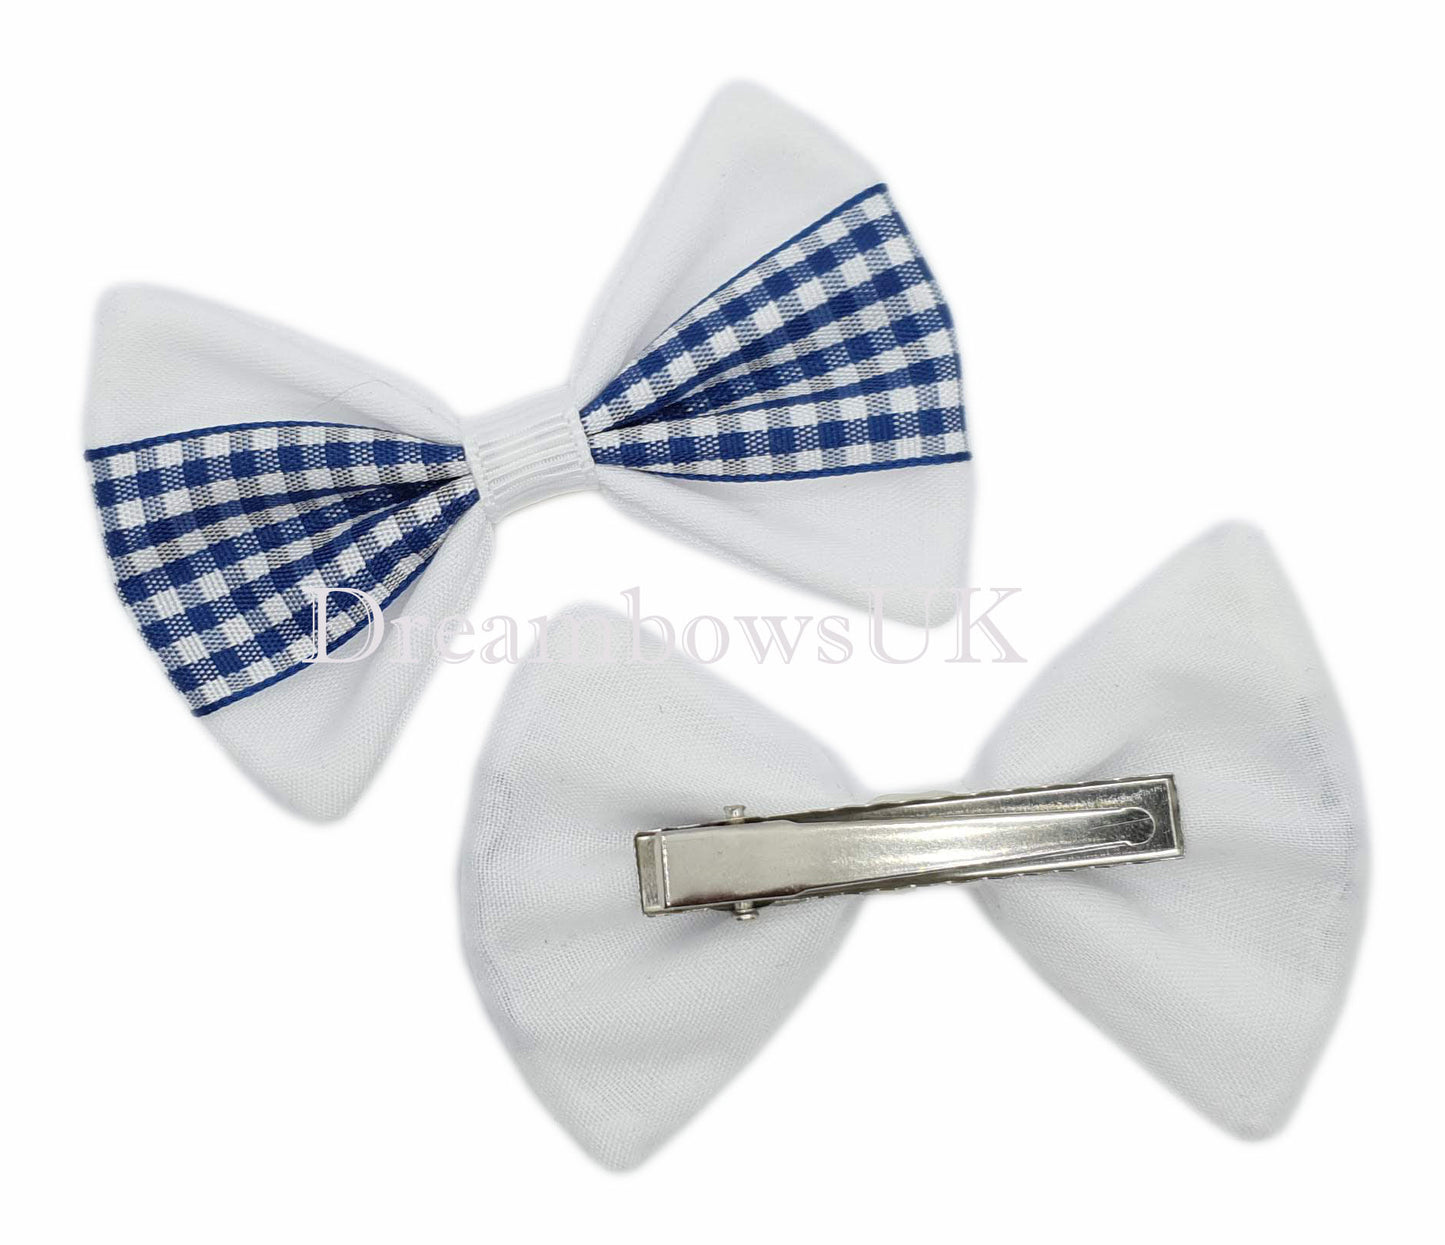 Navy blue and white gingham hair bows on crocodile clips